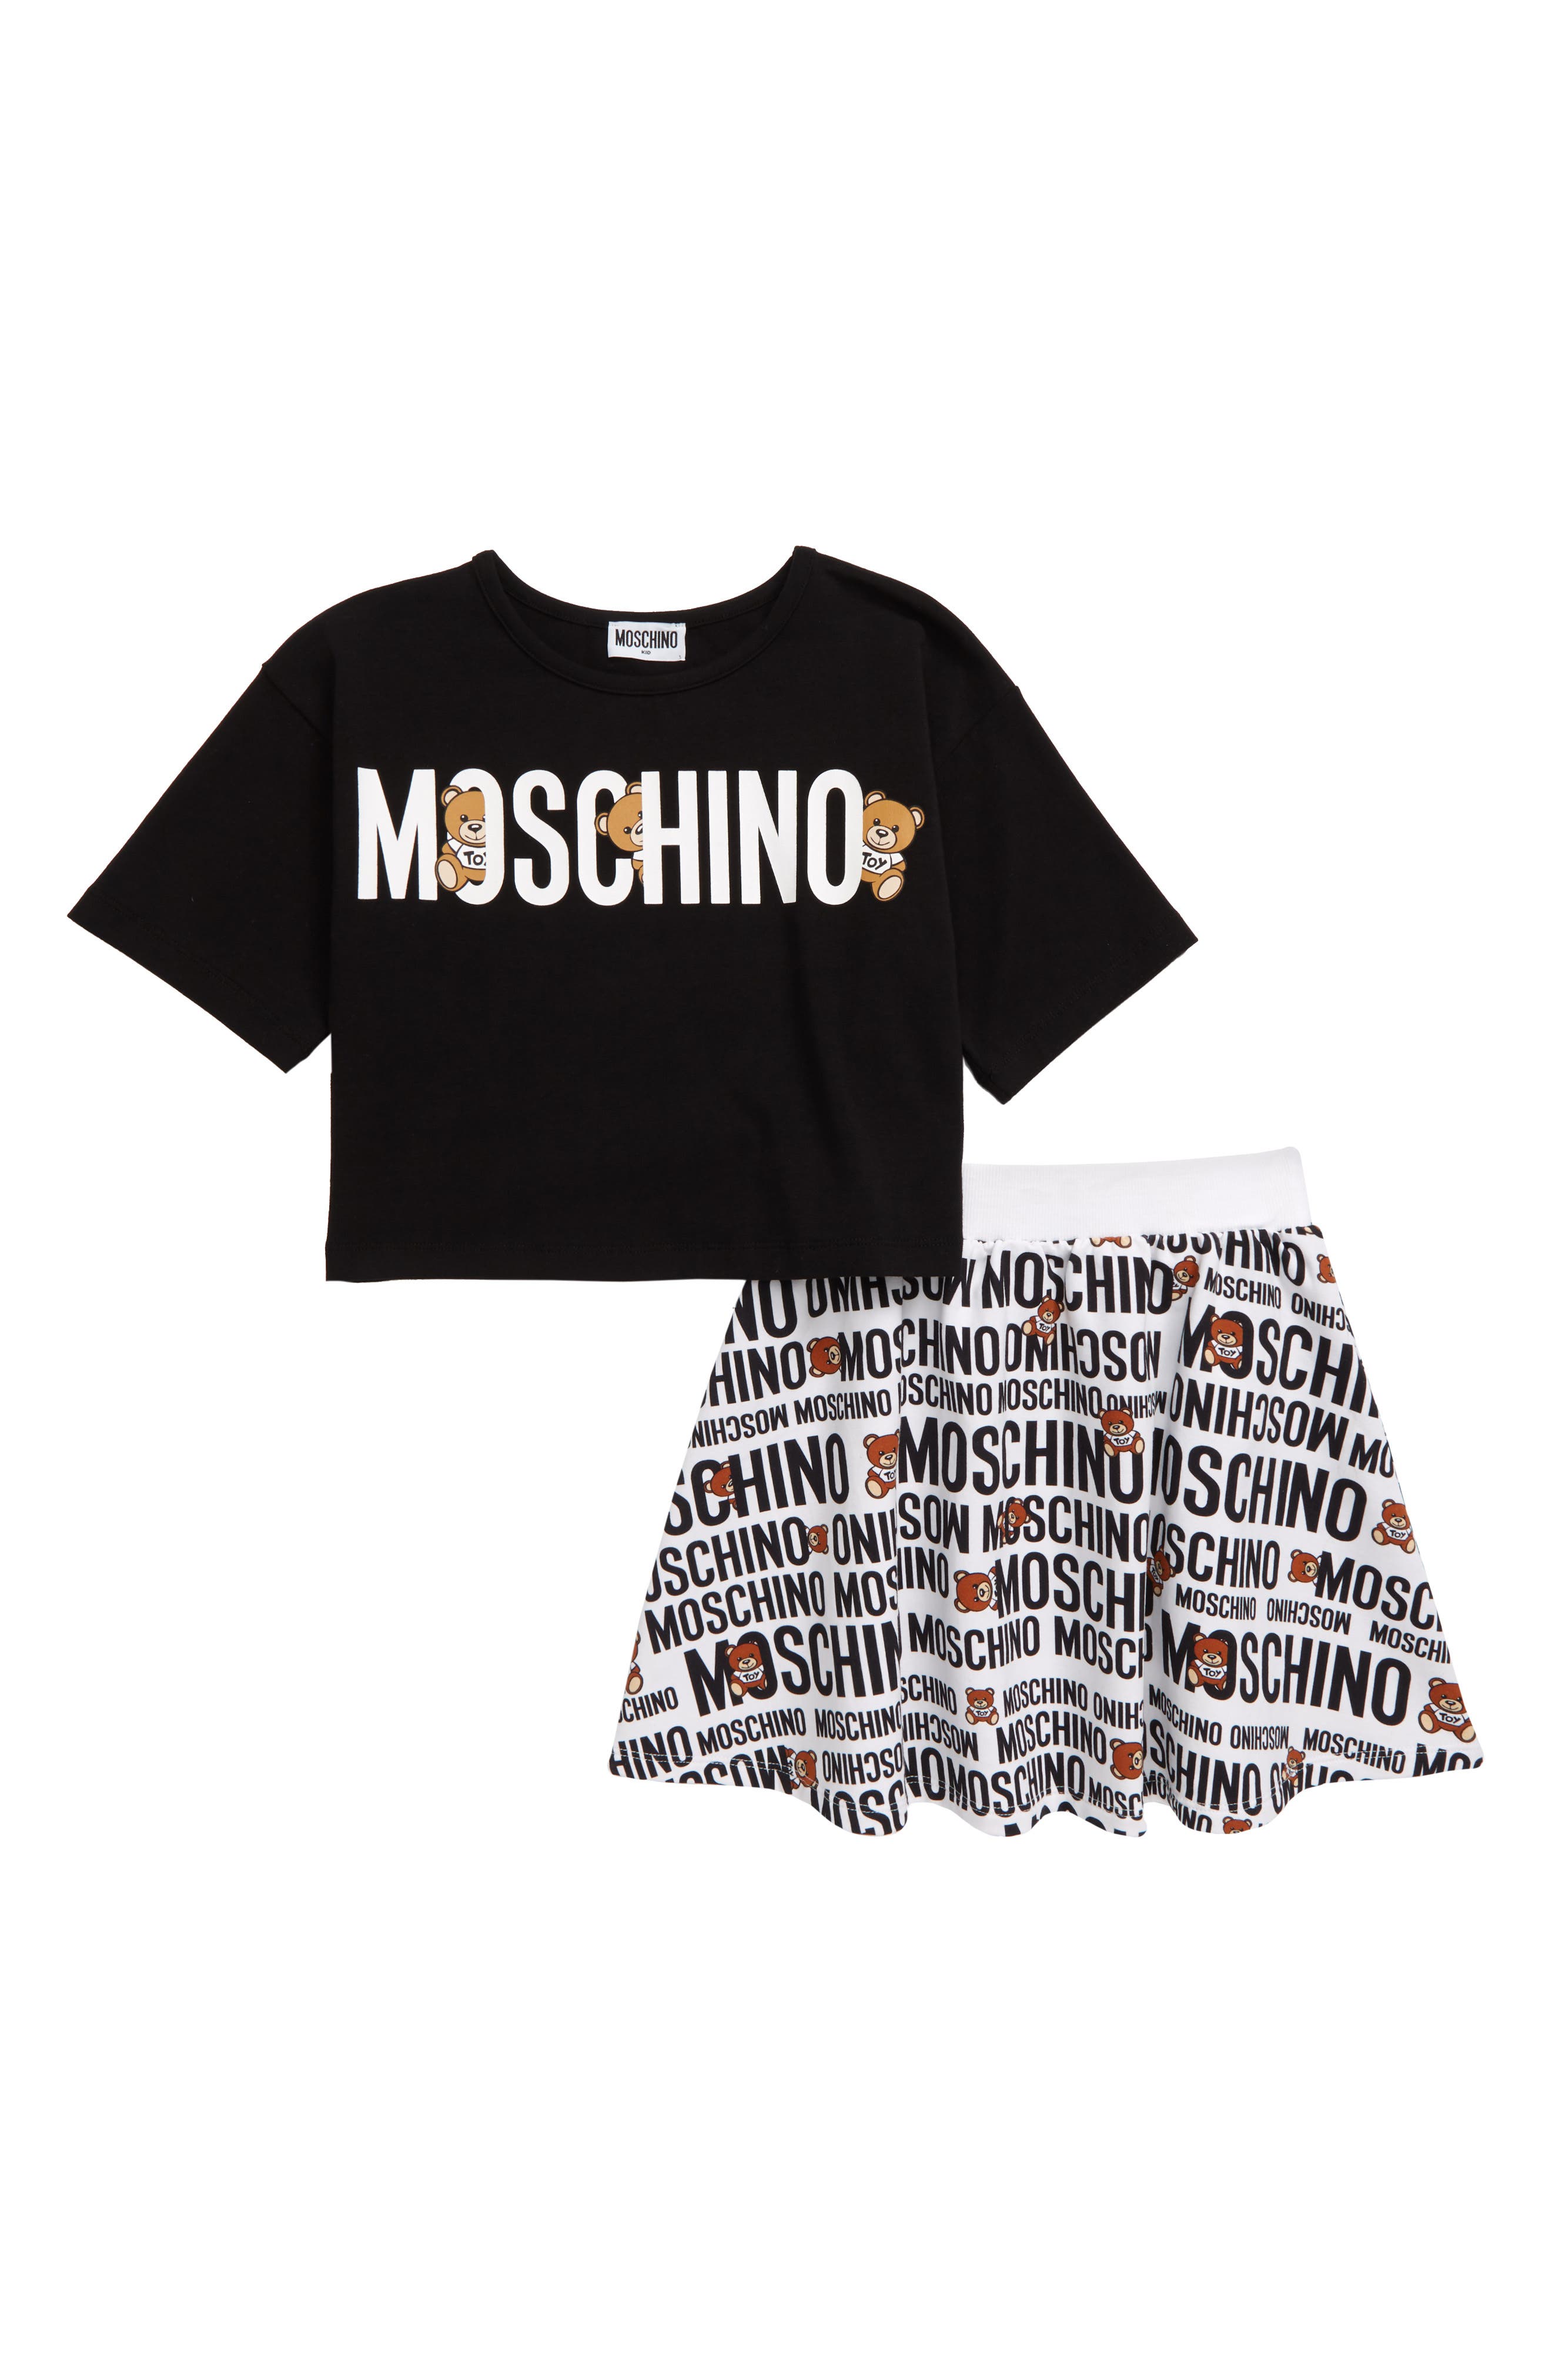 moschino skirt and crop top